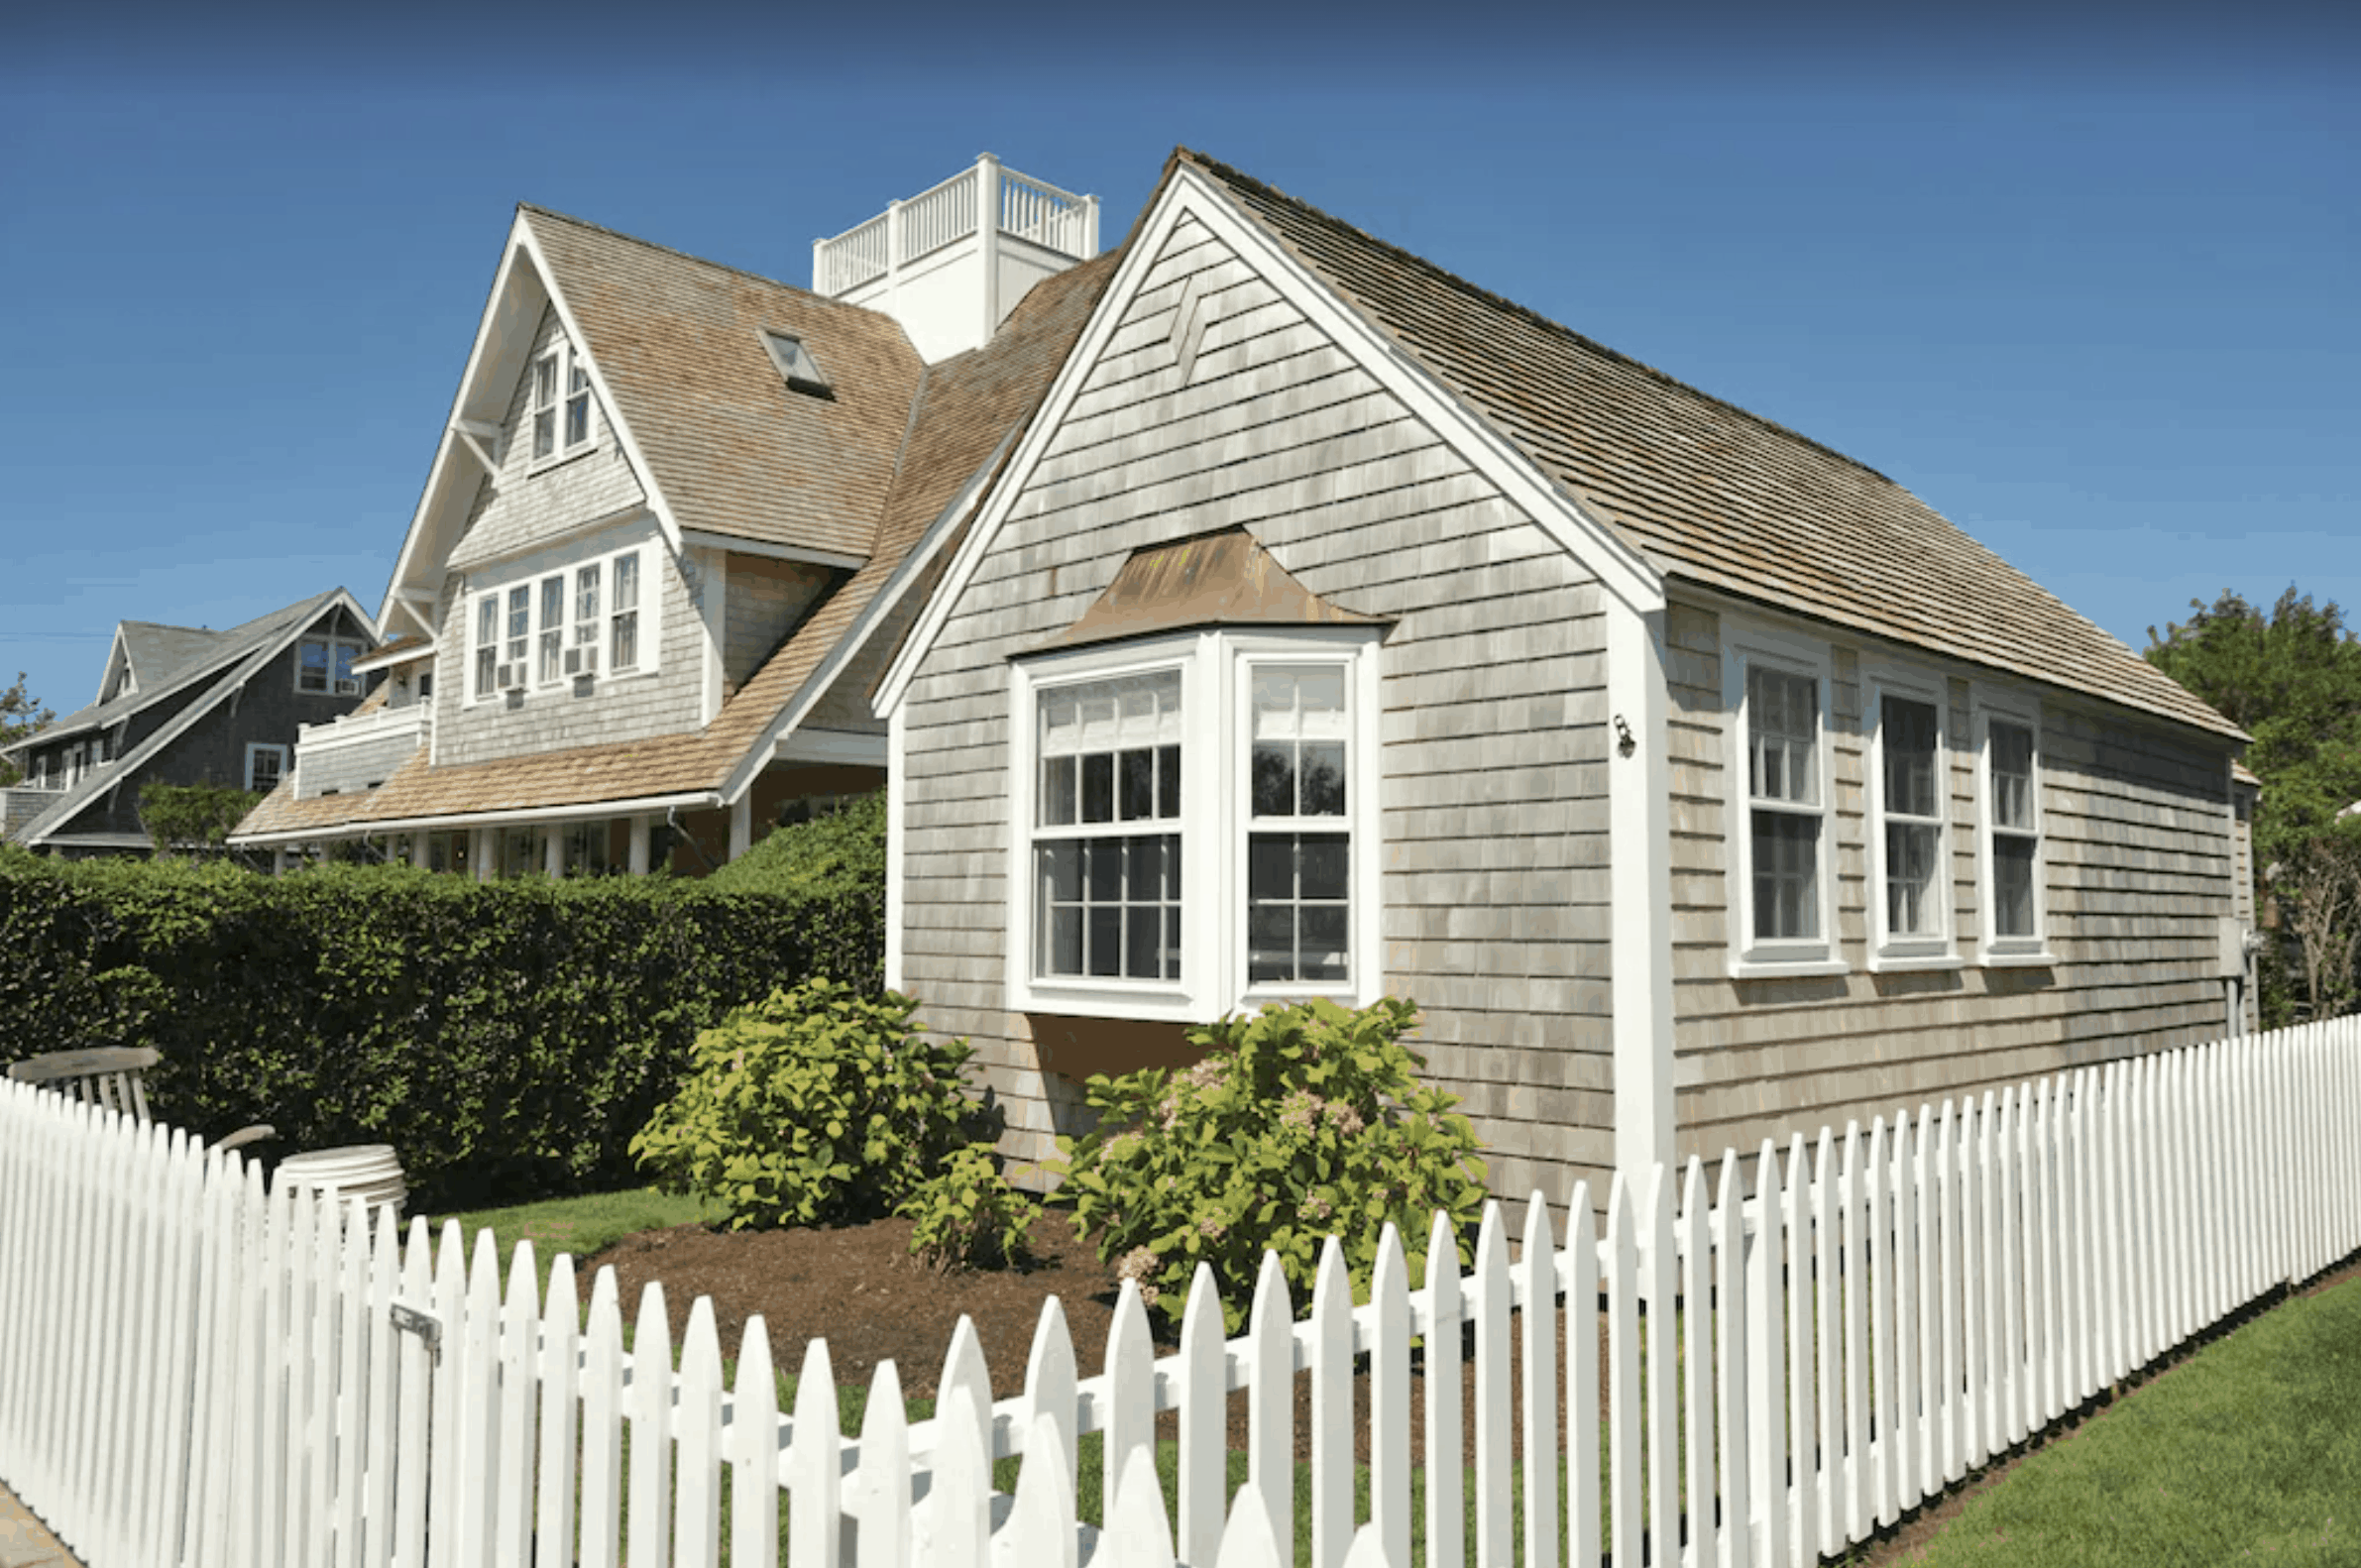 A grey Massachusetts cottage with a white picture window, surrounded by a white picket fence.